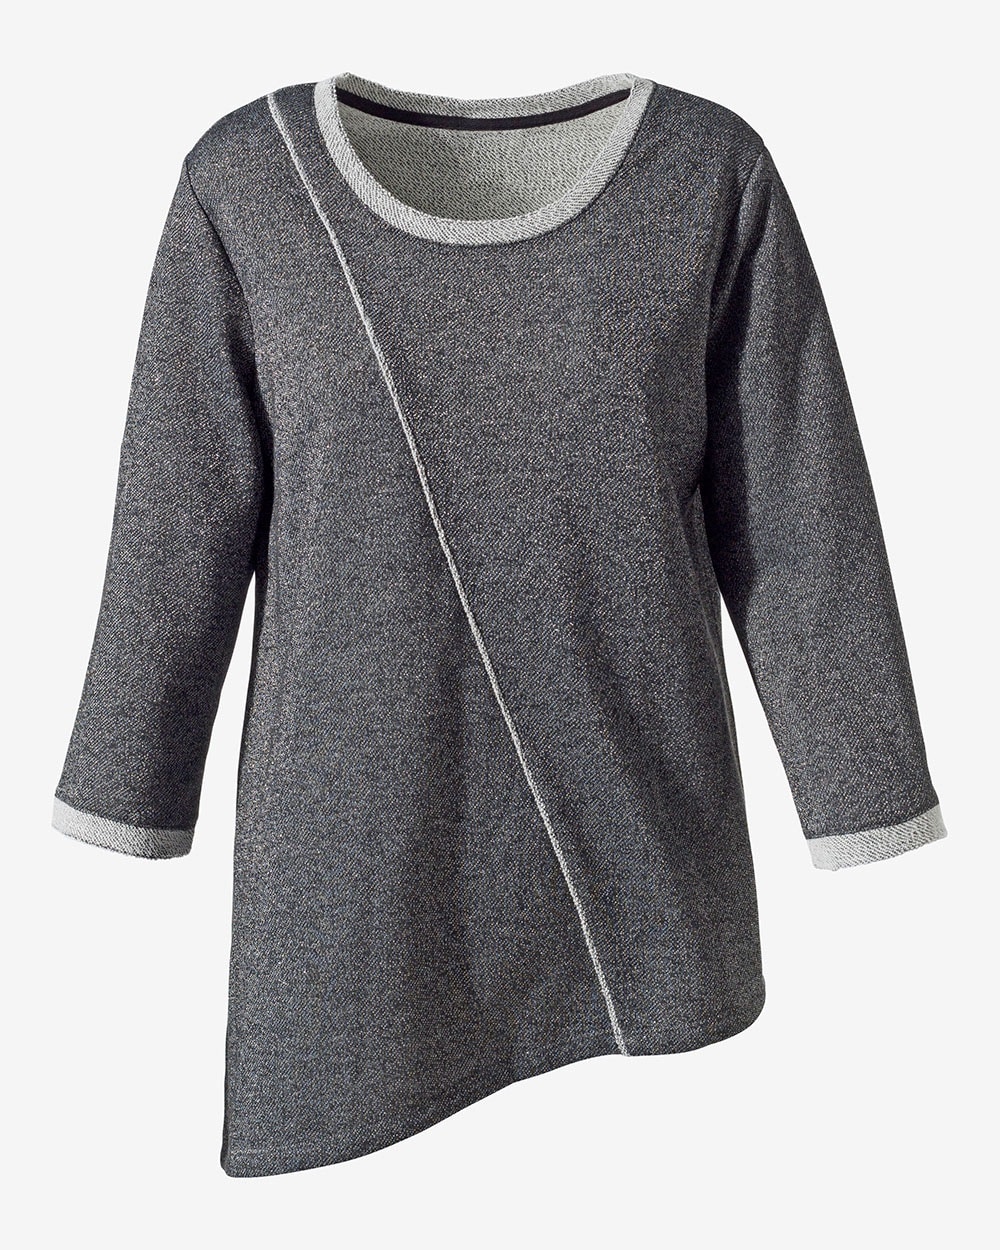 Weekends So Glam French Terry Asymmetrical Tunic Top